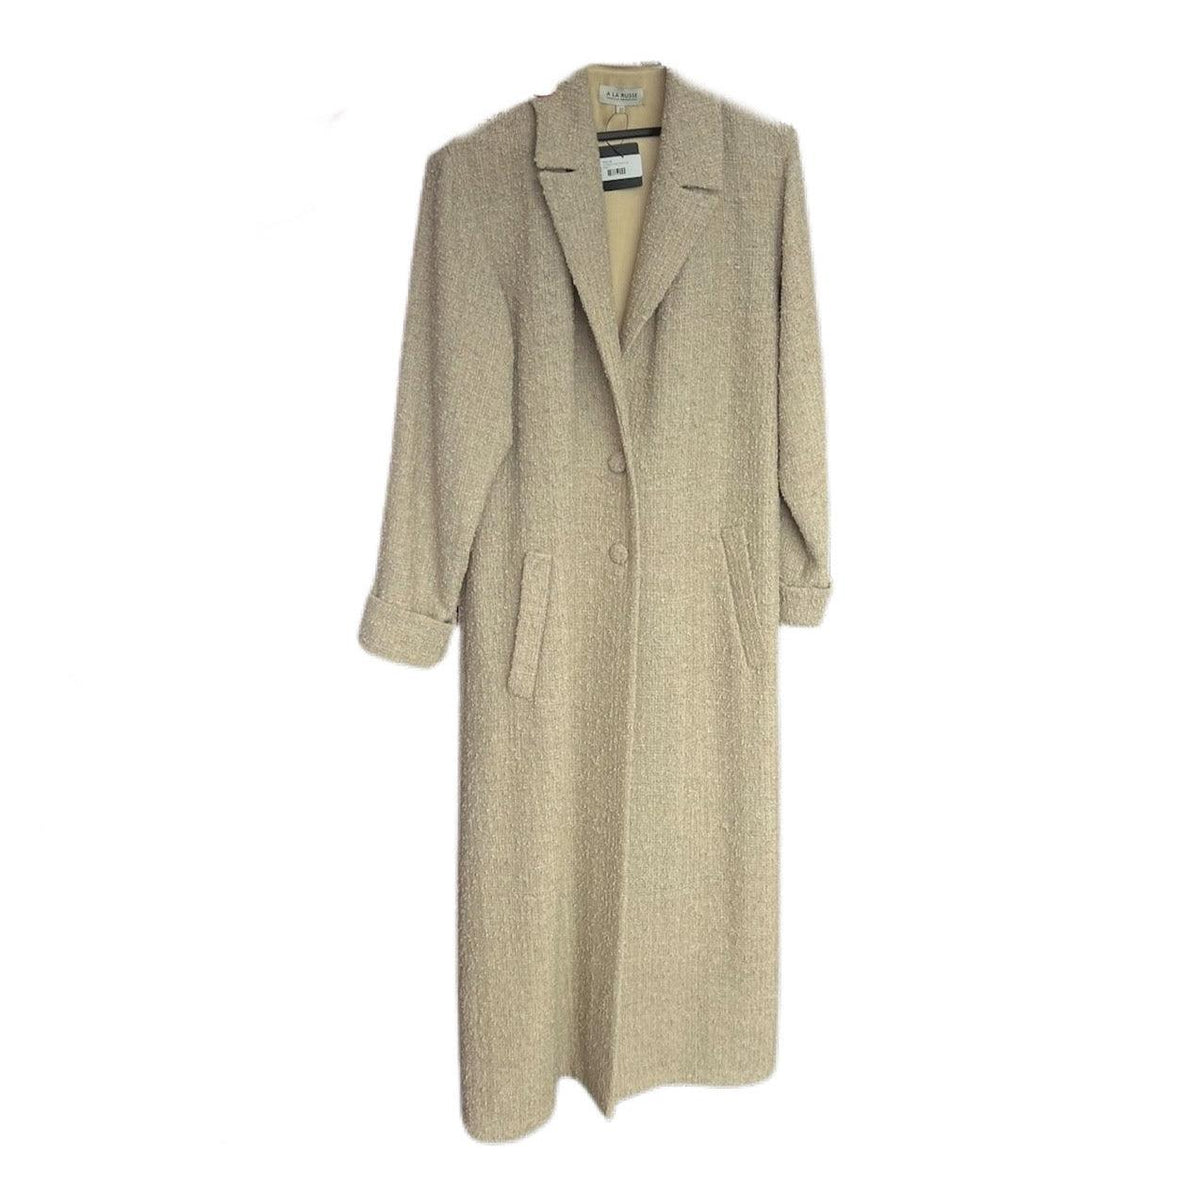 Pre-Owned A LA RUSSE Beige Long Tweed Coat | Size 37 - theREMODA